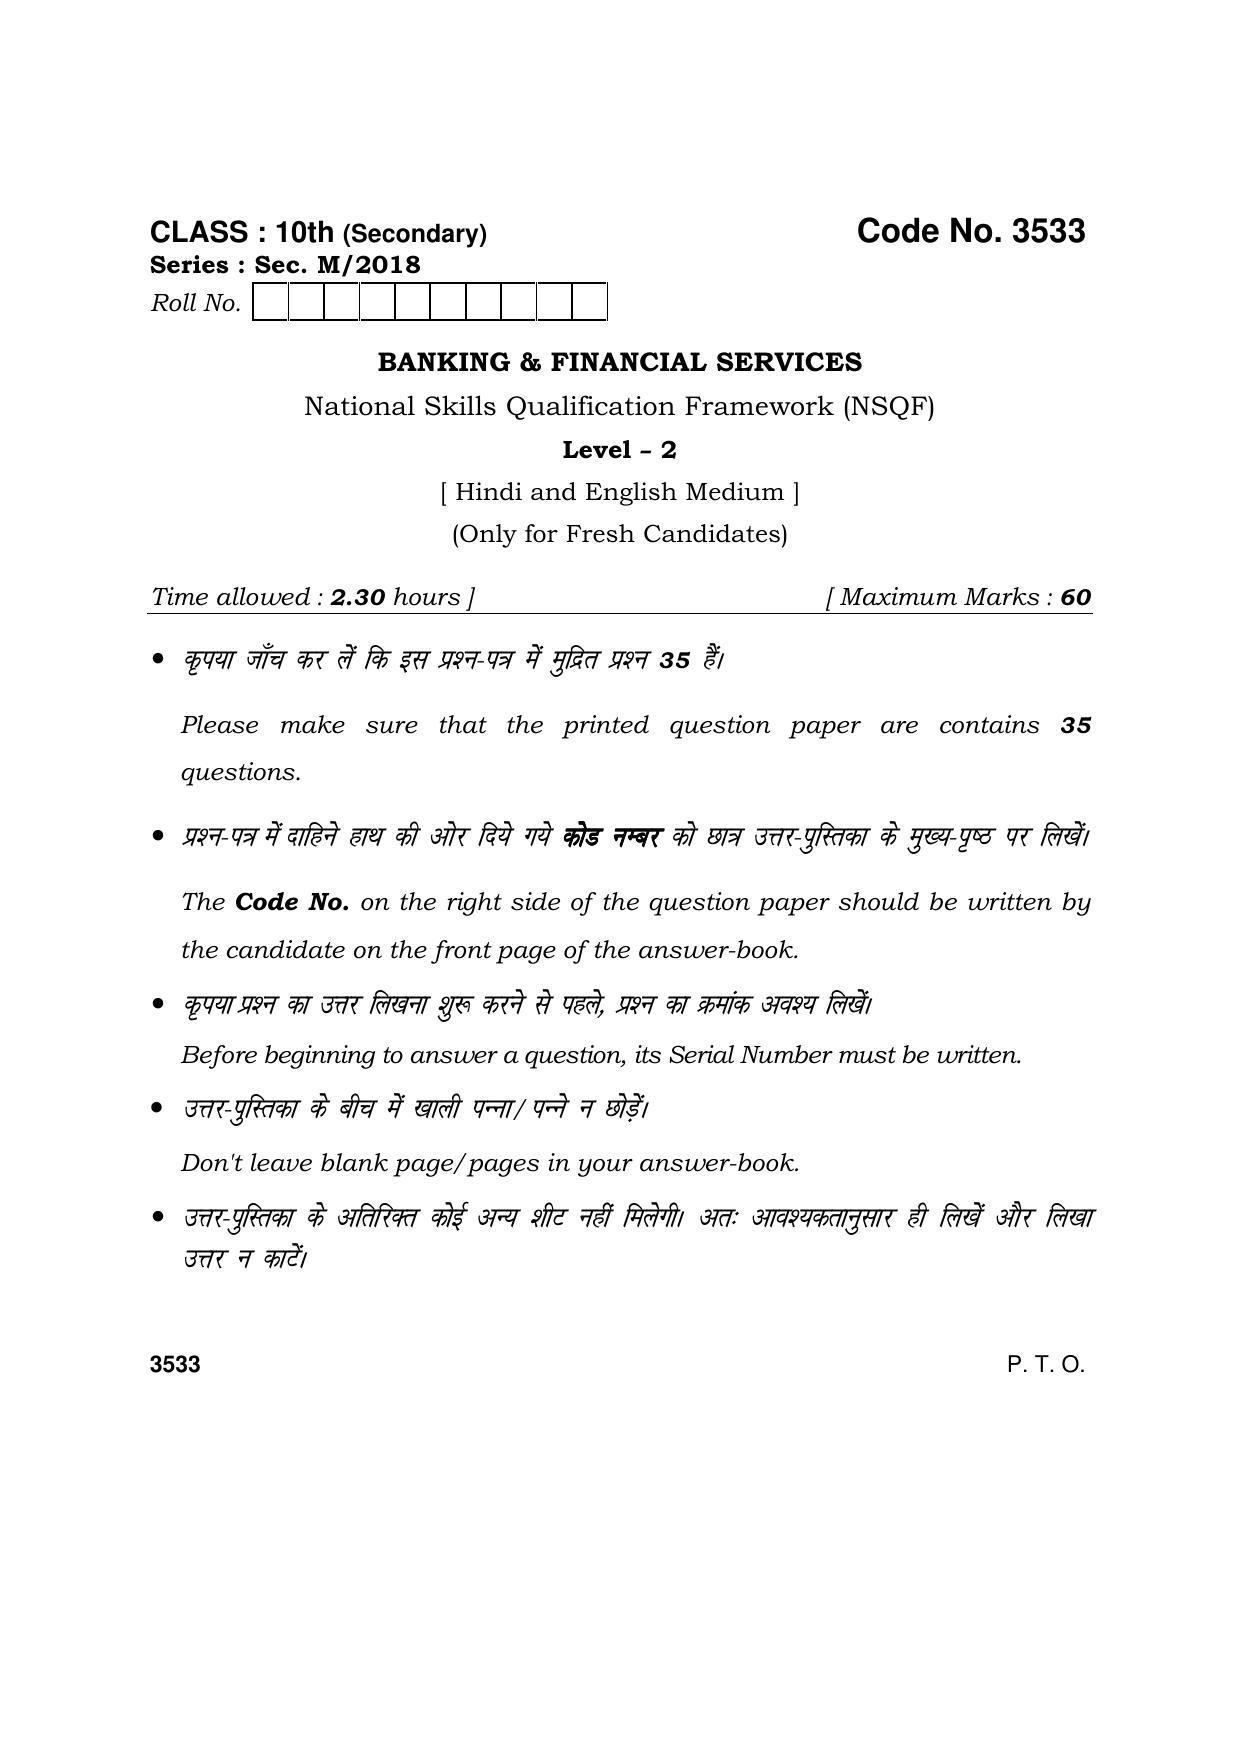 Haryana Board HBSE Class 10 Banking & Financial Services 2018 Question Paper - Page 1